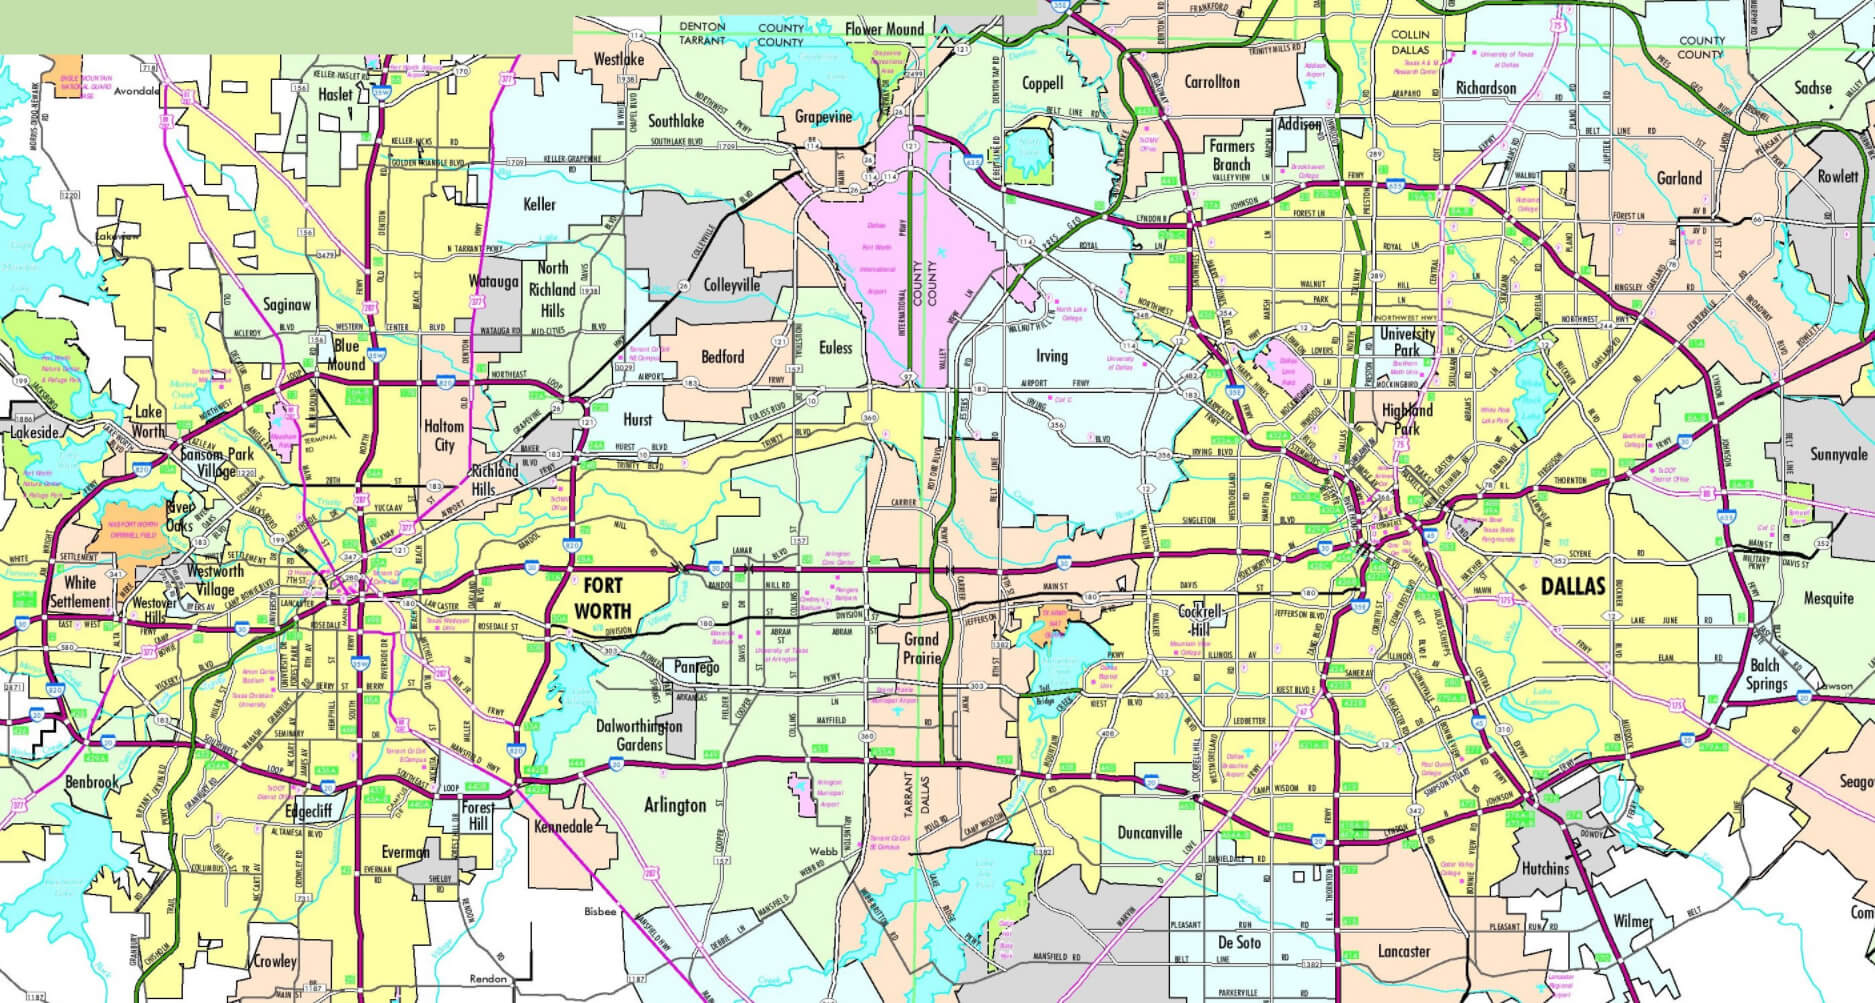 Dallas Fort Worth Zip Code Map Zip Codes Colorized | lupon.gov.ph